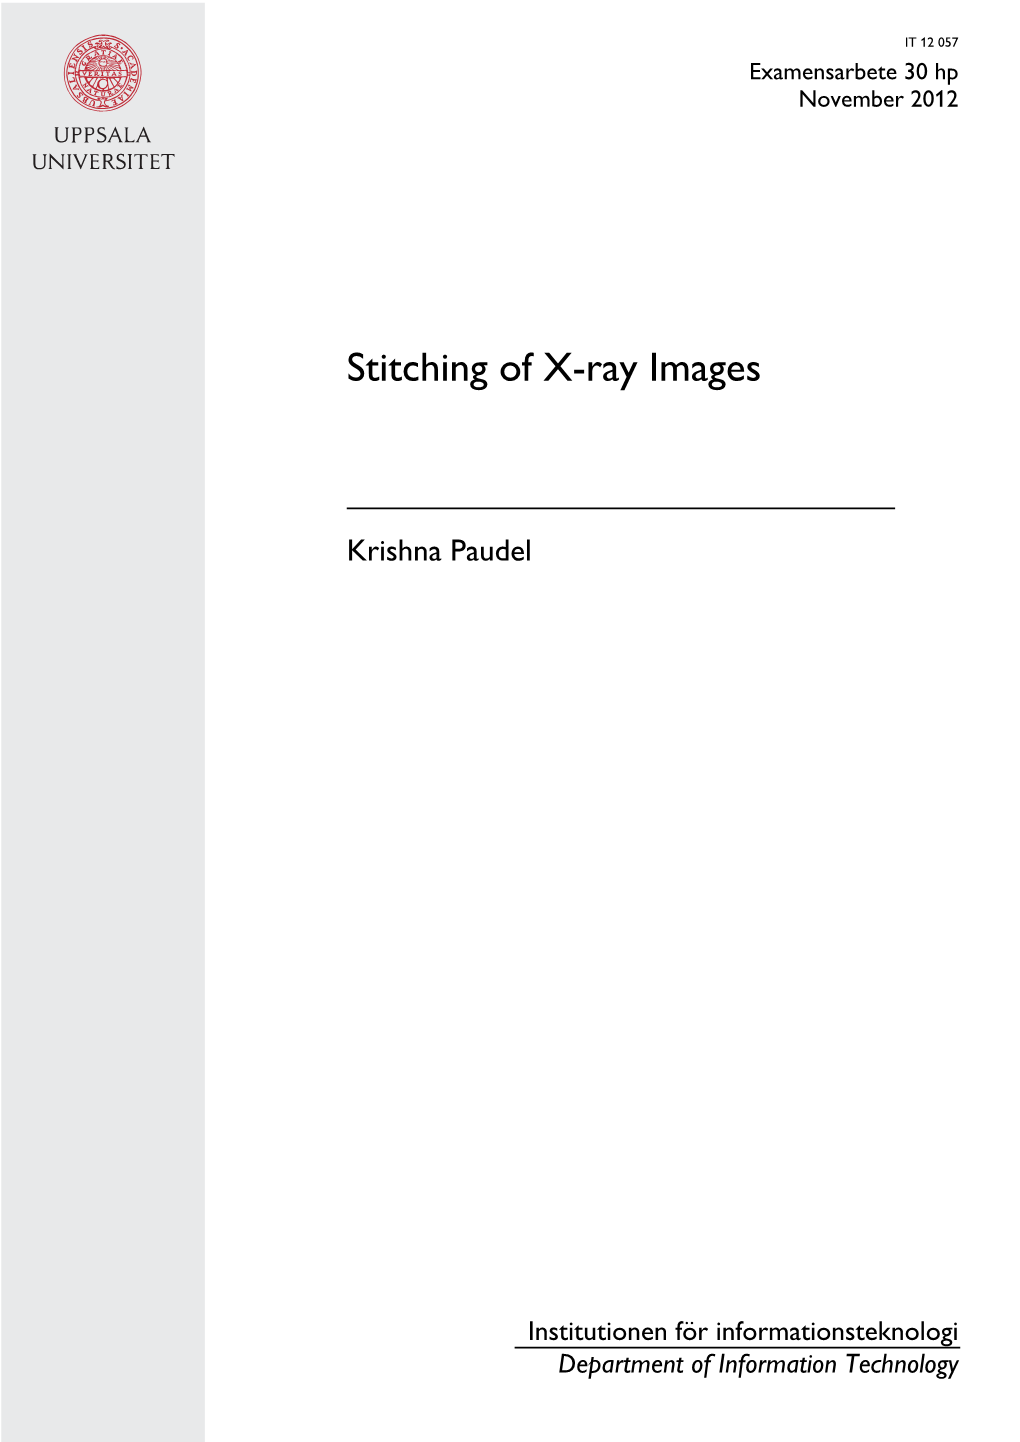 Stitching of X-Ray Images